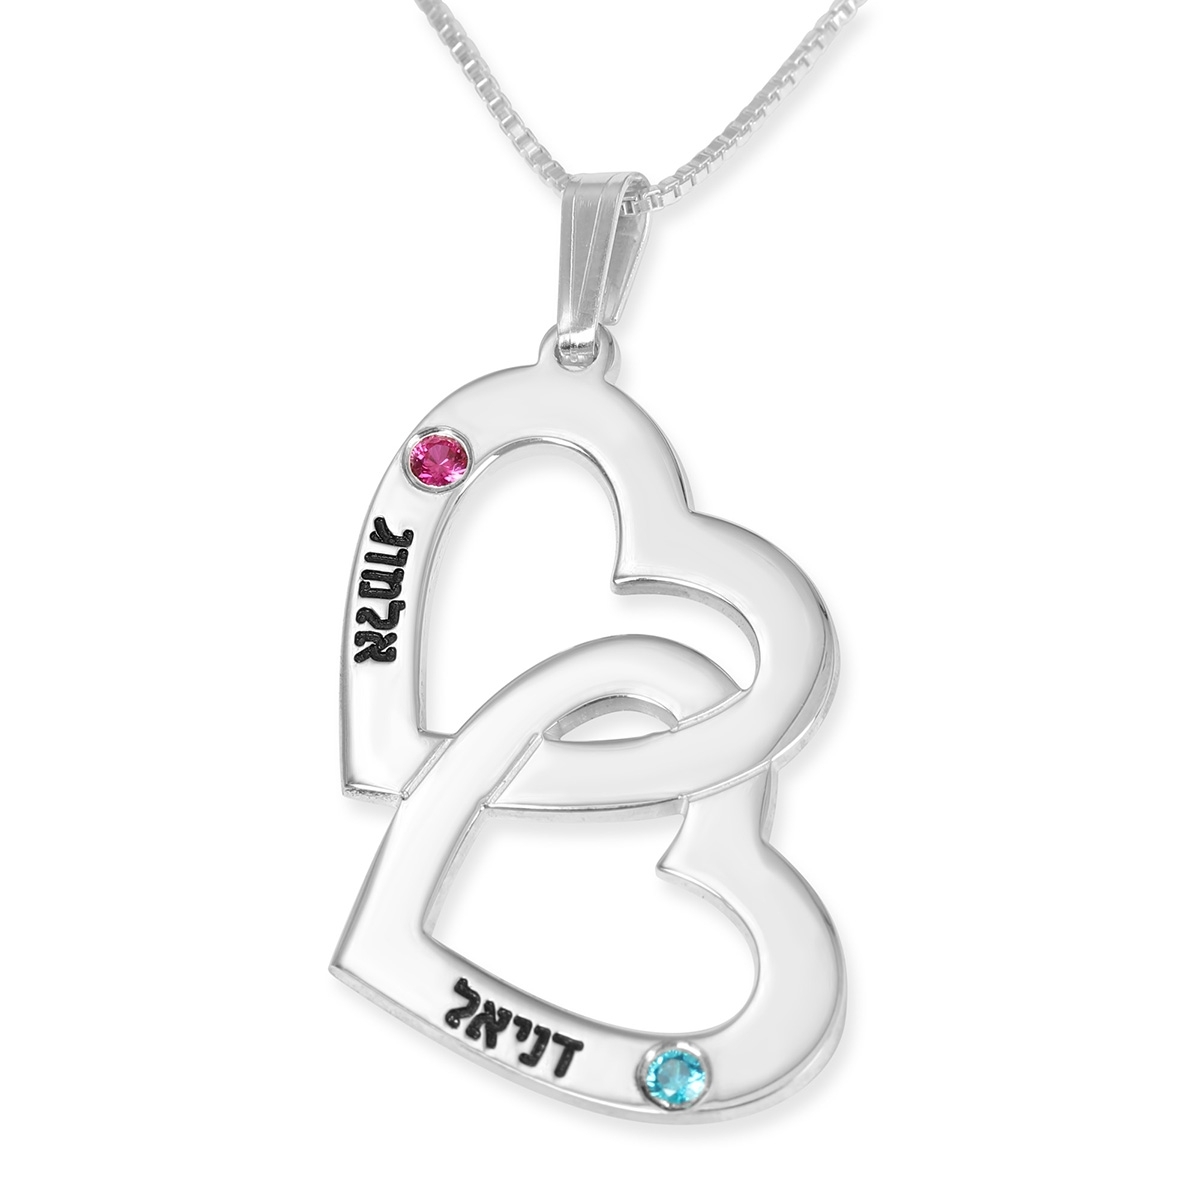 Customizable Sterling Silver Intertwined Hearts Necklace with Birth Stones - Hebrew / English - 1